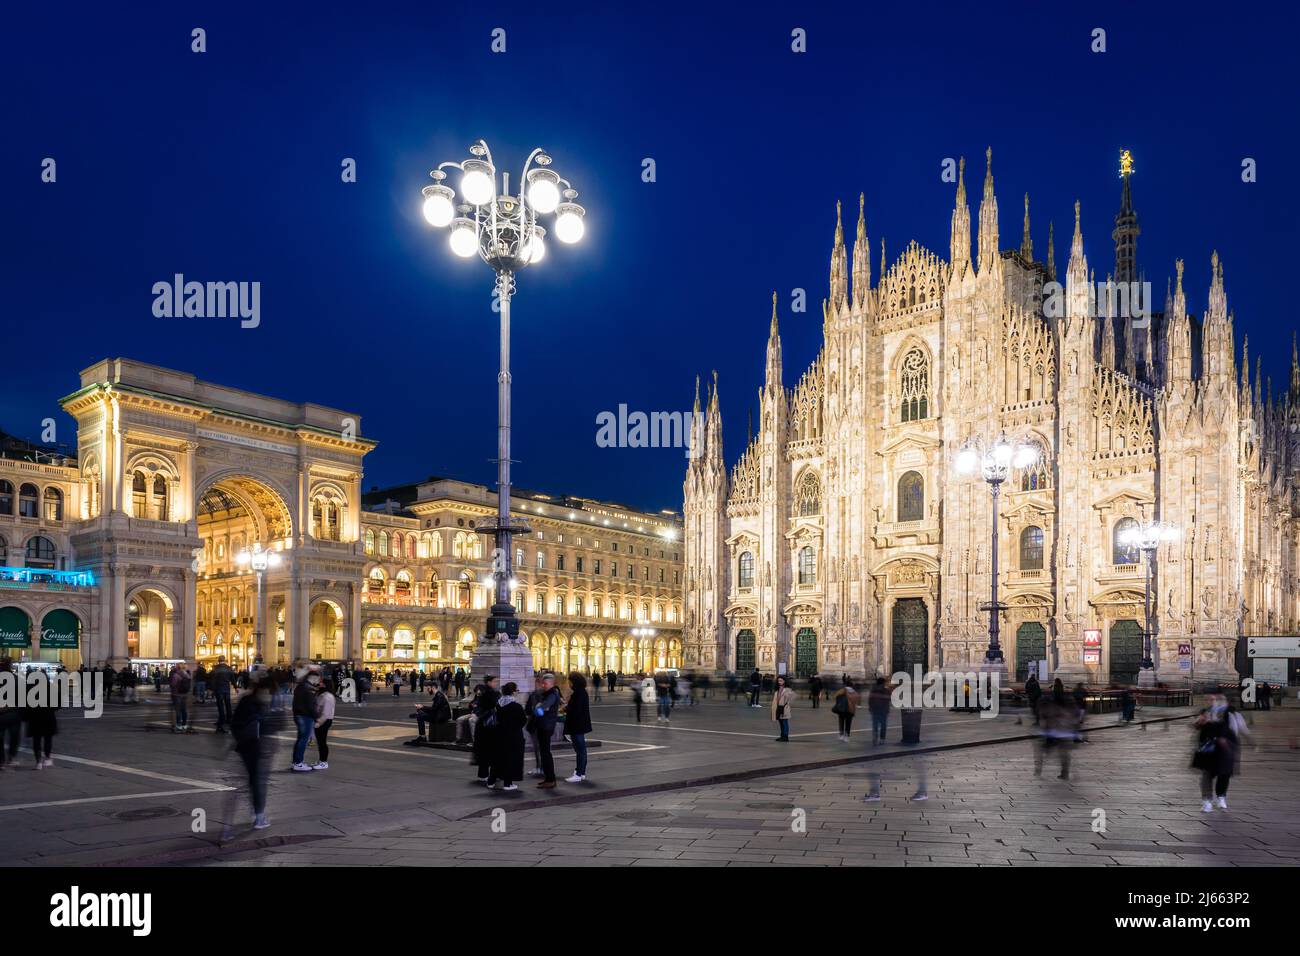 People enjoy the Piazza del Duomo, dominated by the facade of the cathedral and the Vittorio Emanuele II gallery's entrance at night in Milan, Italy. Stock Photo